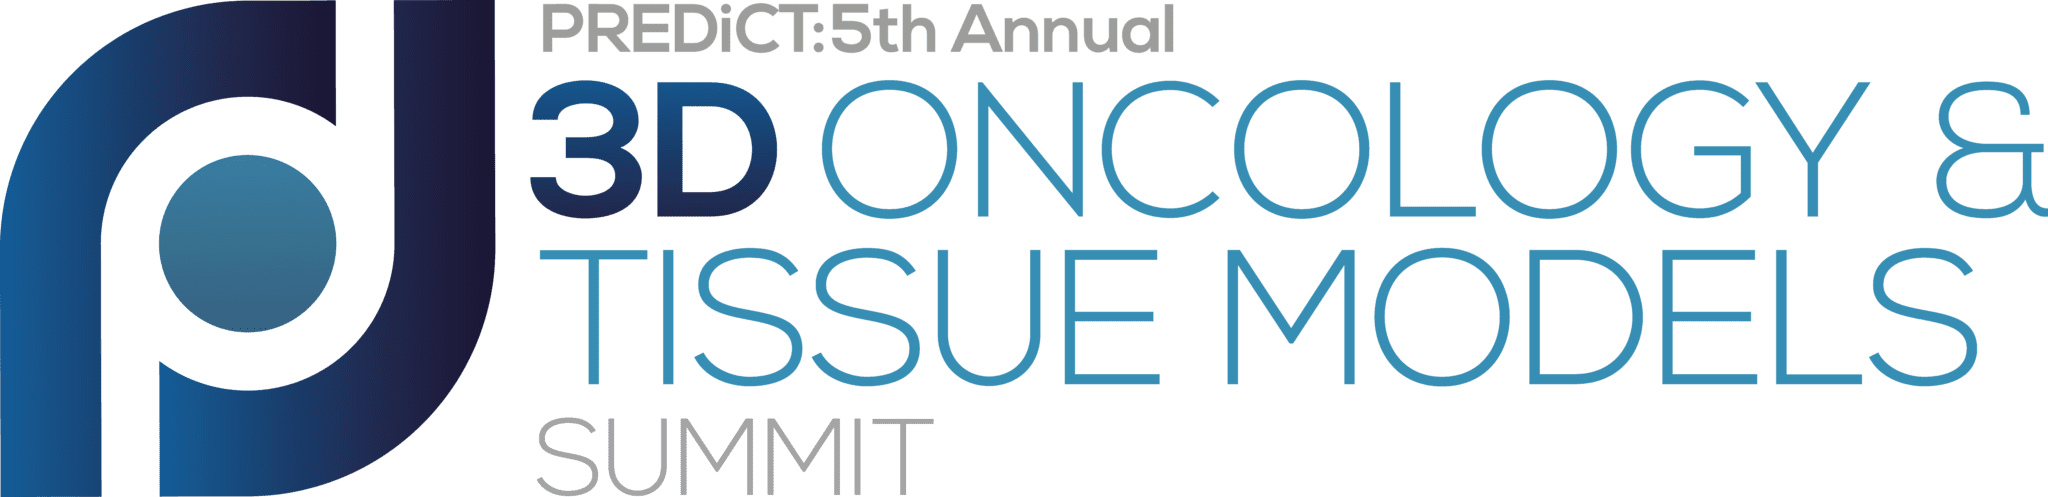 HW191211-5th-Annual-PREDiCT-3D-Oncology-Tissue-Models-Summit-logo